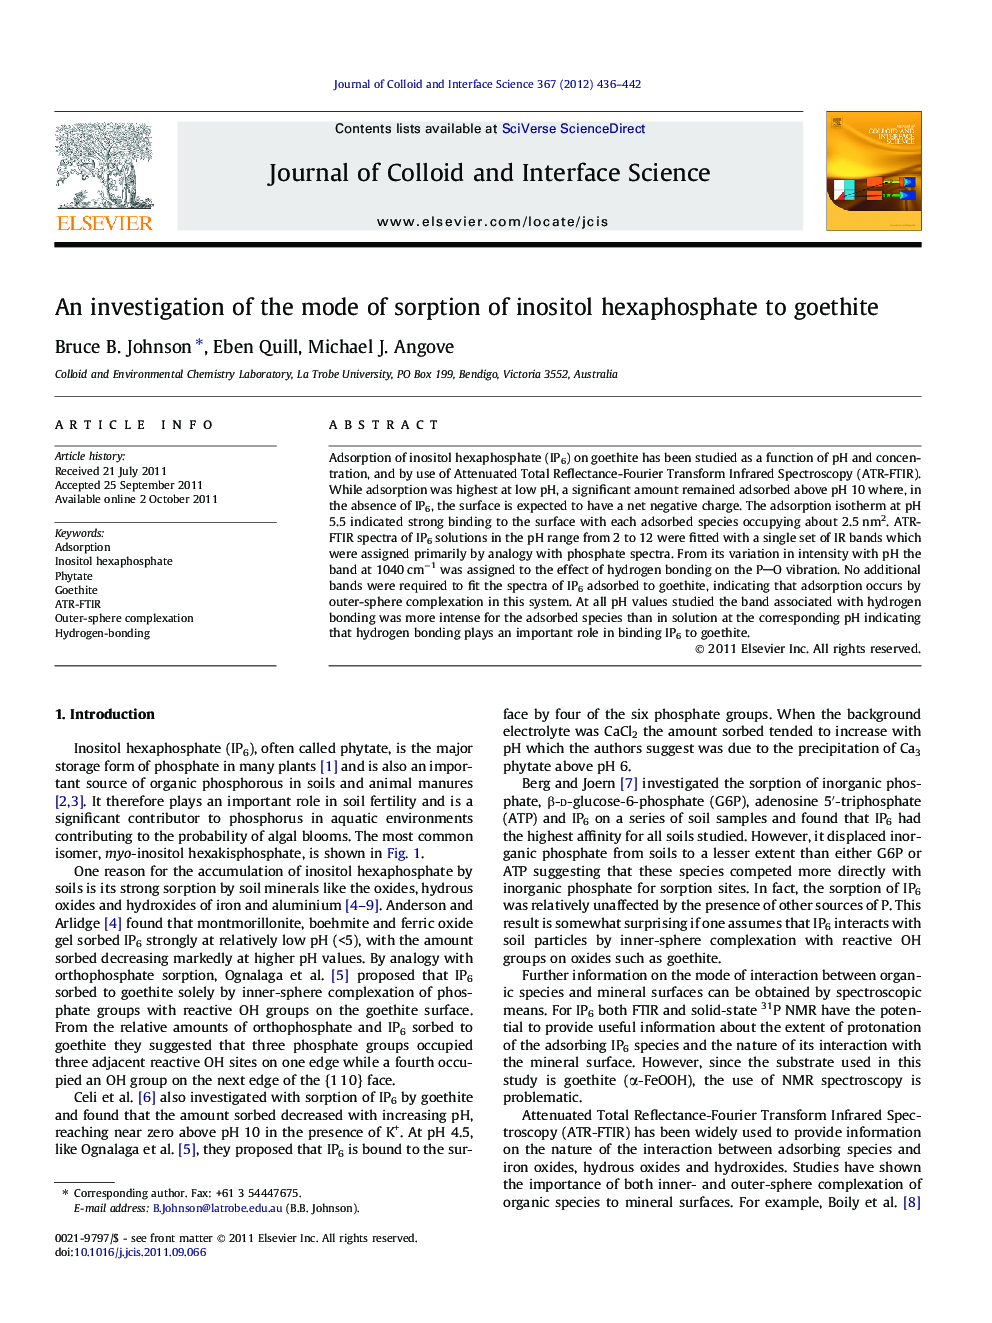 An investigation of the mode of sorption of inositol hexaphosphate to goethite